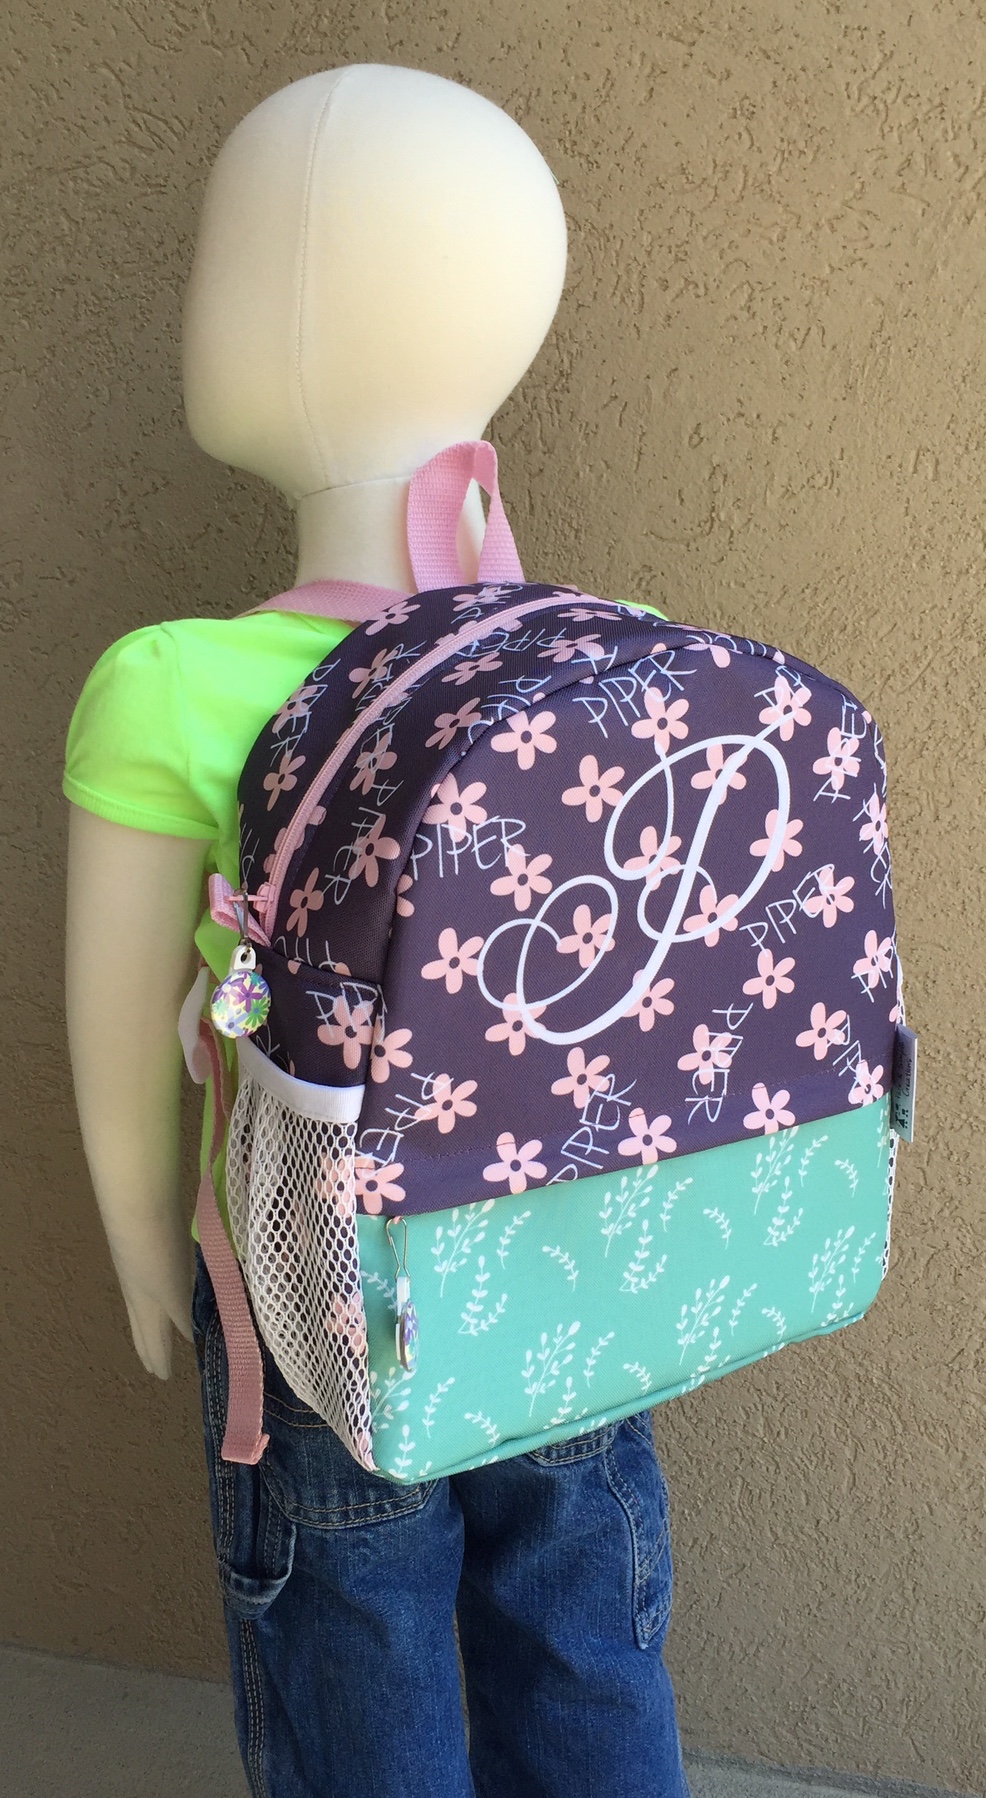 Toddler Backpack made with sublimation printing